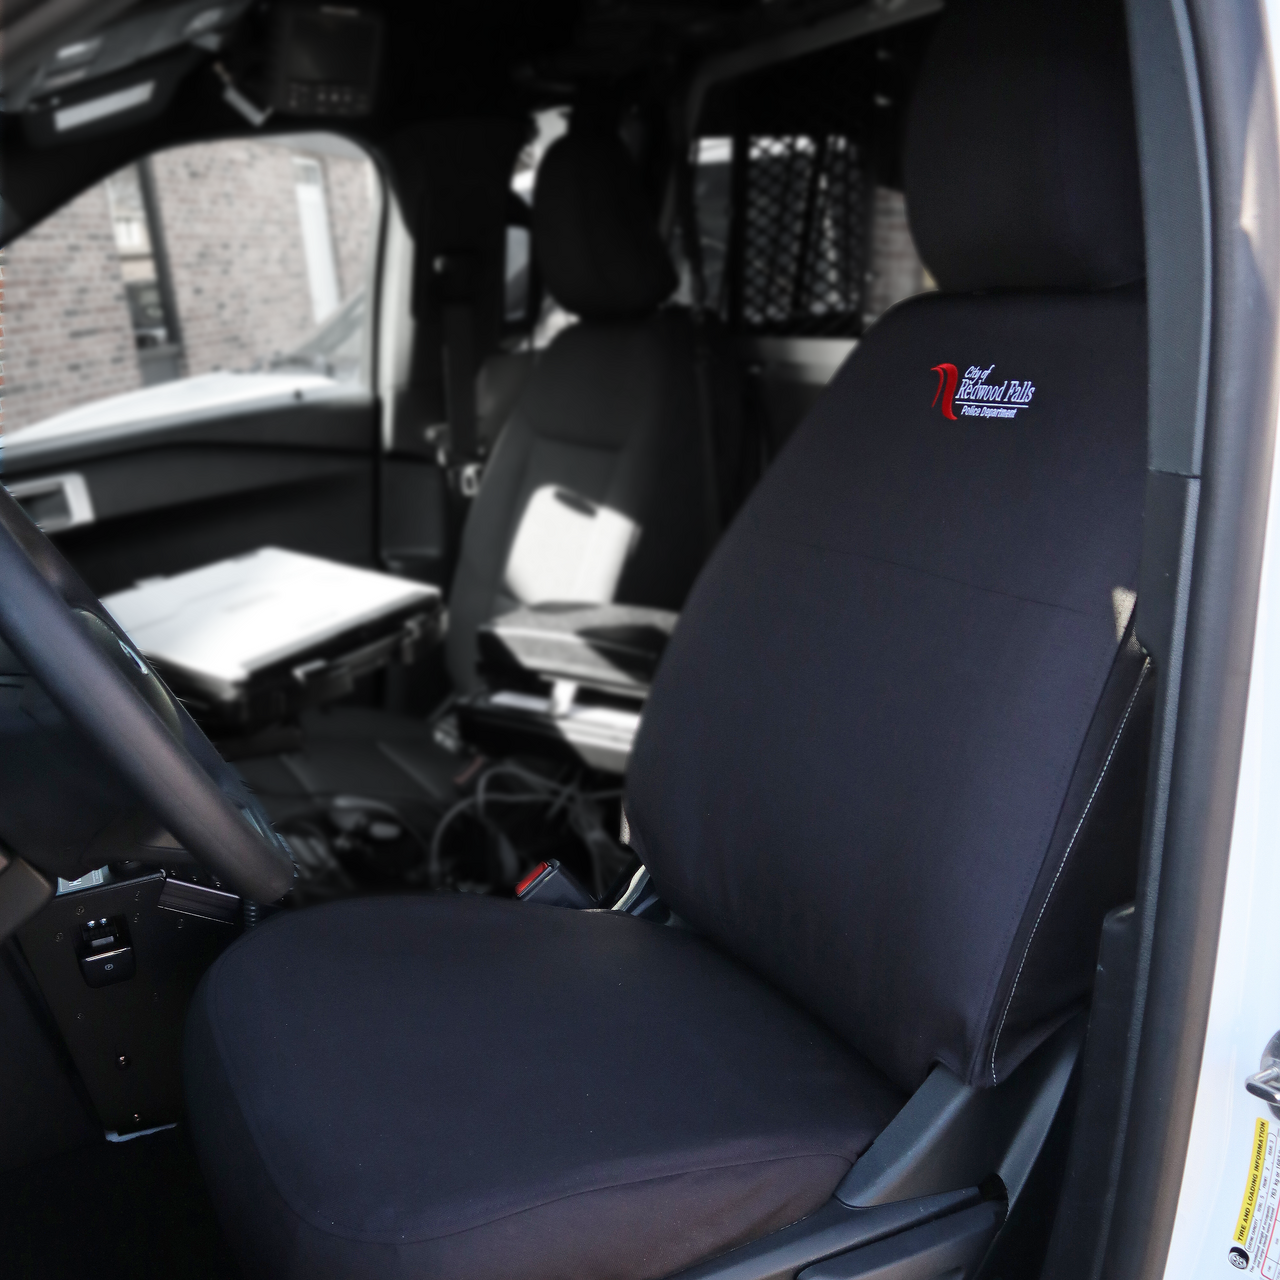 Ford Police Interceptor Utility Seat with Black TigerTough Seat Cover